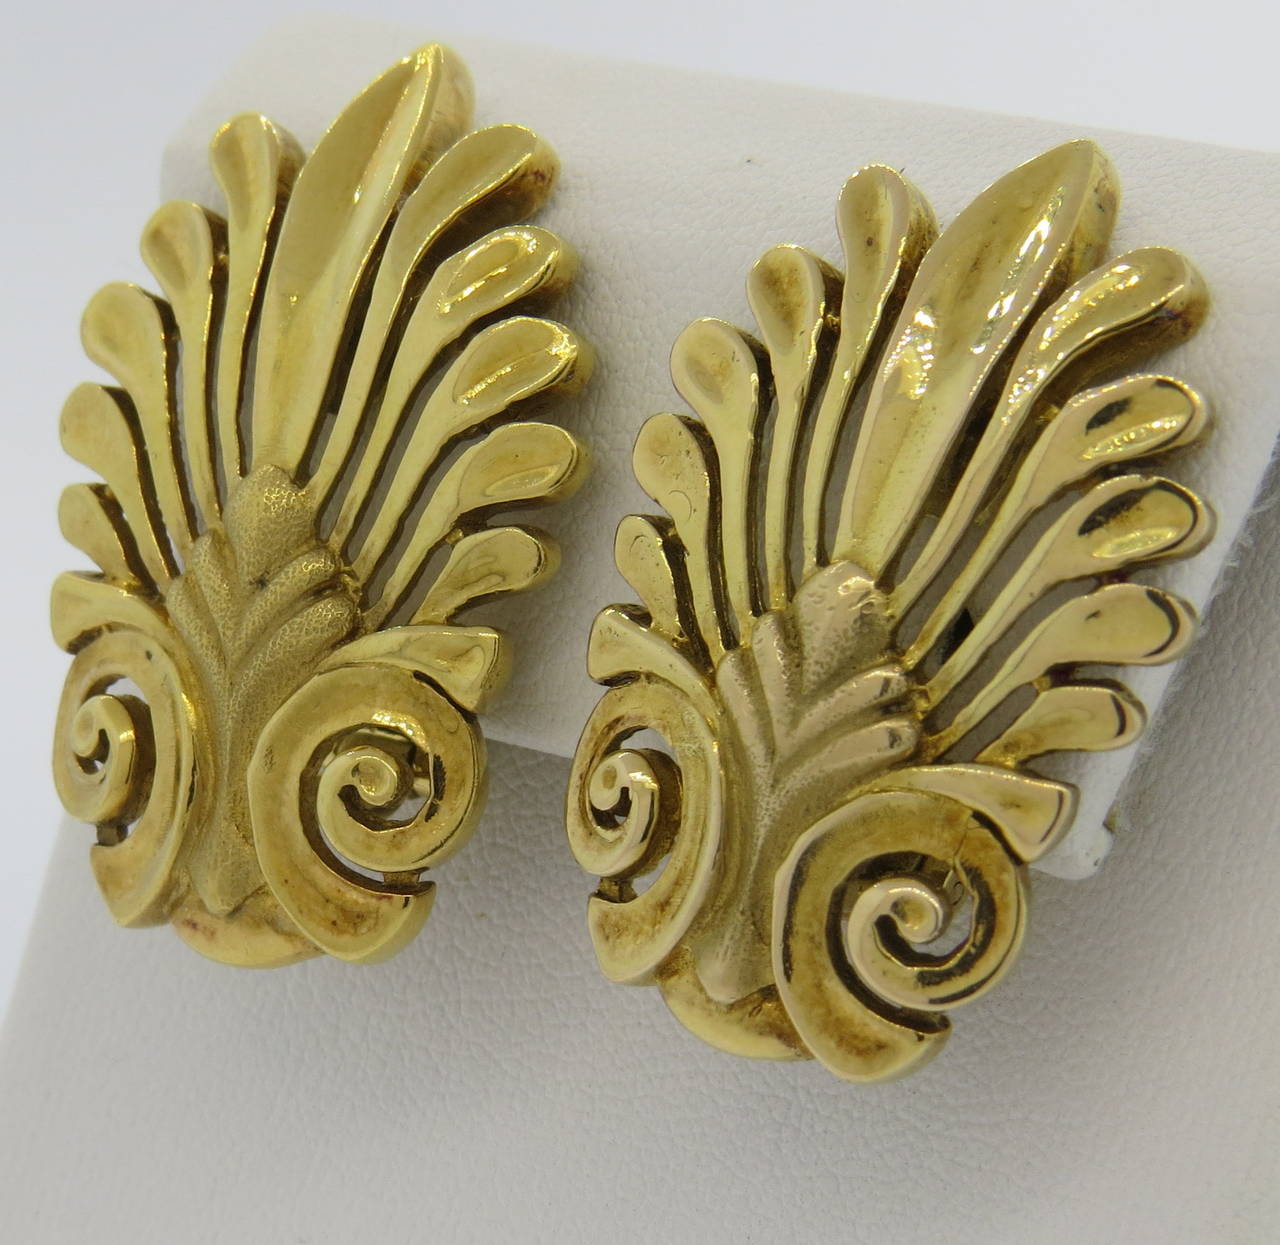 18k gold earrings by Ilias Lalaounis, measuring 36mm x 25mm. Marked A21, 750 and Greece. weight - 25gr